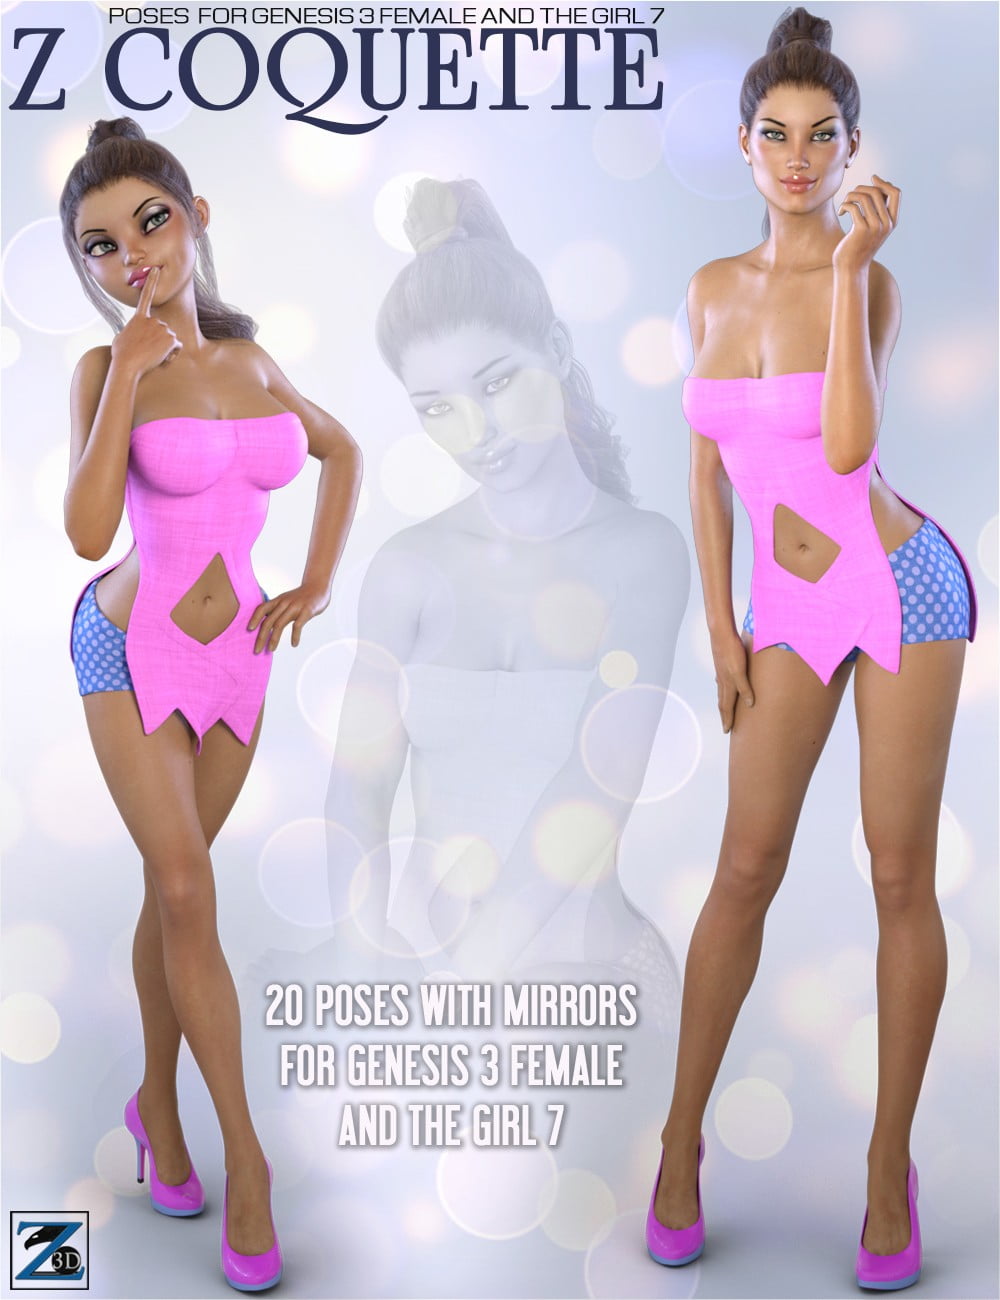 00-main-z-coquette-poses-for-genesis-3-female-and-the-girl-7-daz3d